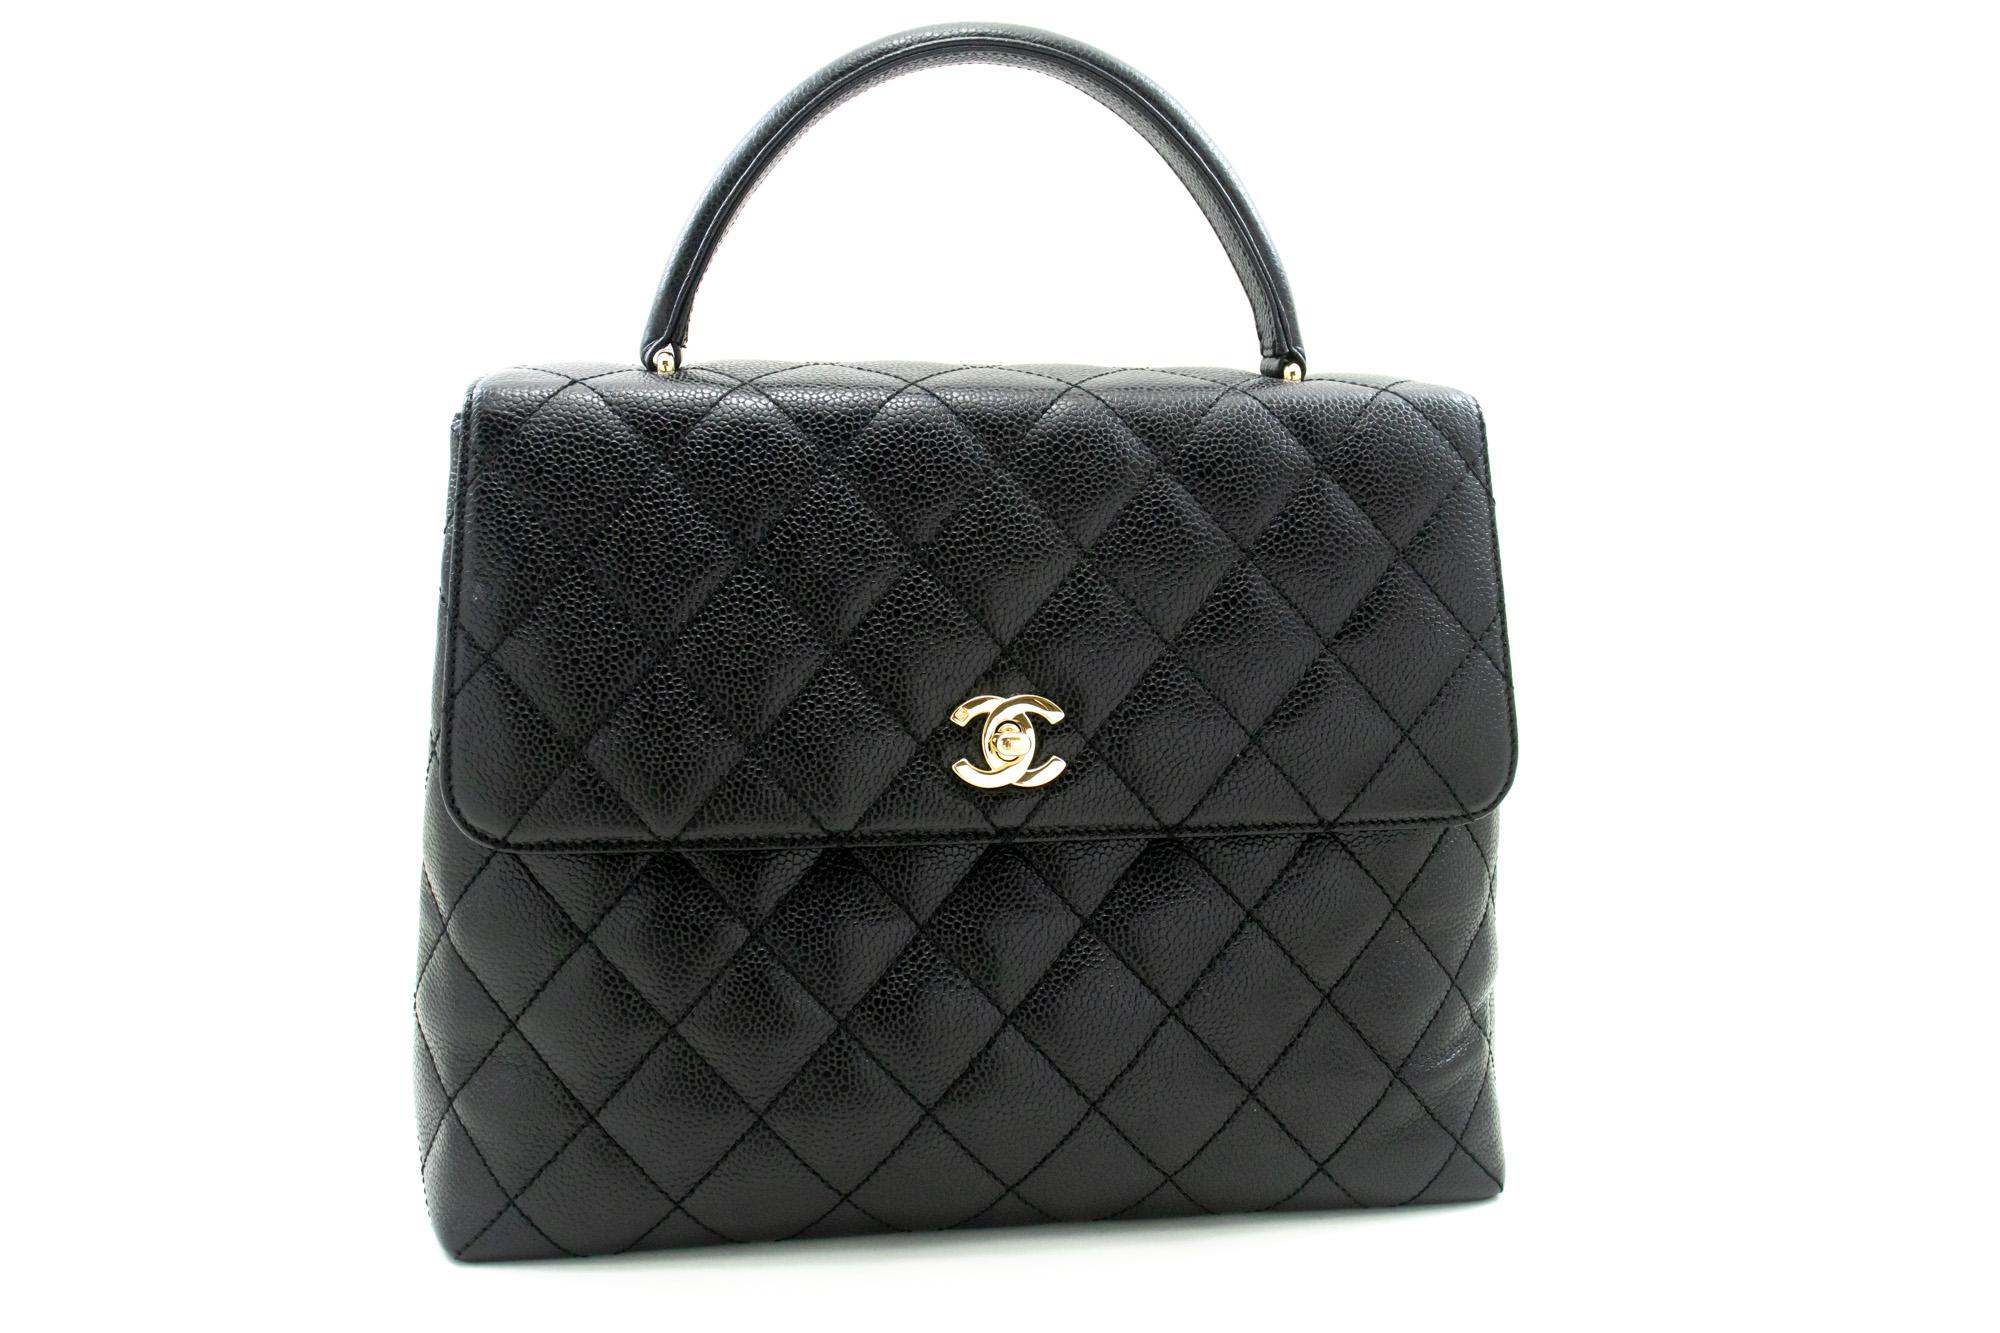 An authentic CHANEL Caviar Handbag Top Handle Bag Kelly Black Flap Leather Gold. The color is Black. The outside material is Leather. The pattern is Solid. This item is Vintage / Classic. The year of manufacture would be 2 0 0 2 .
Conditions &